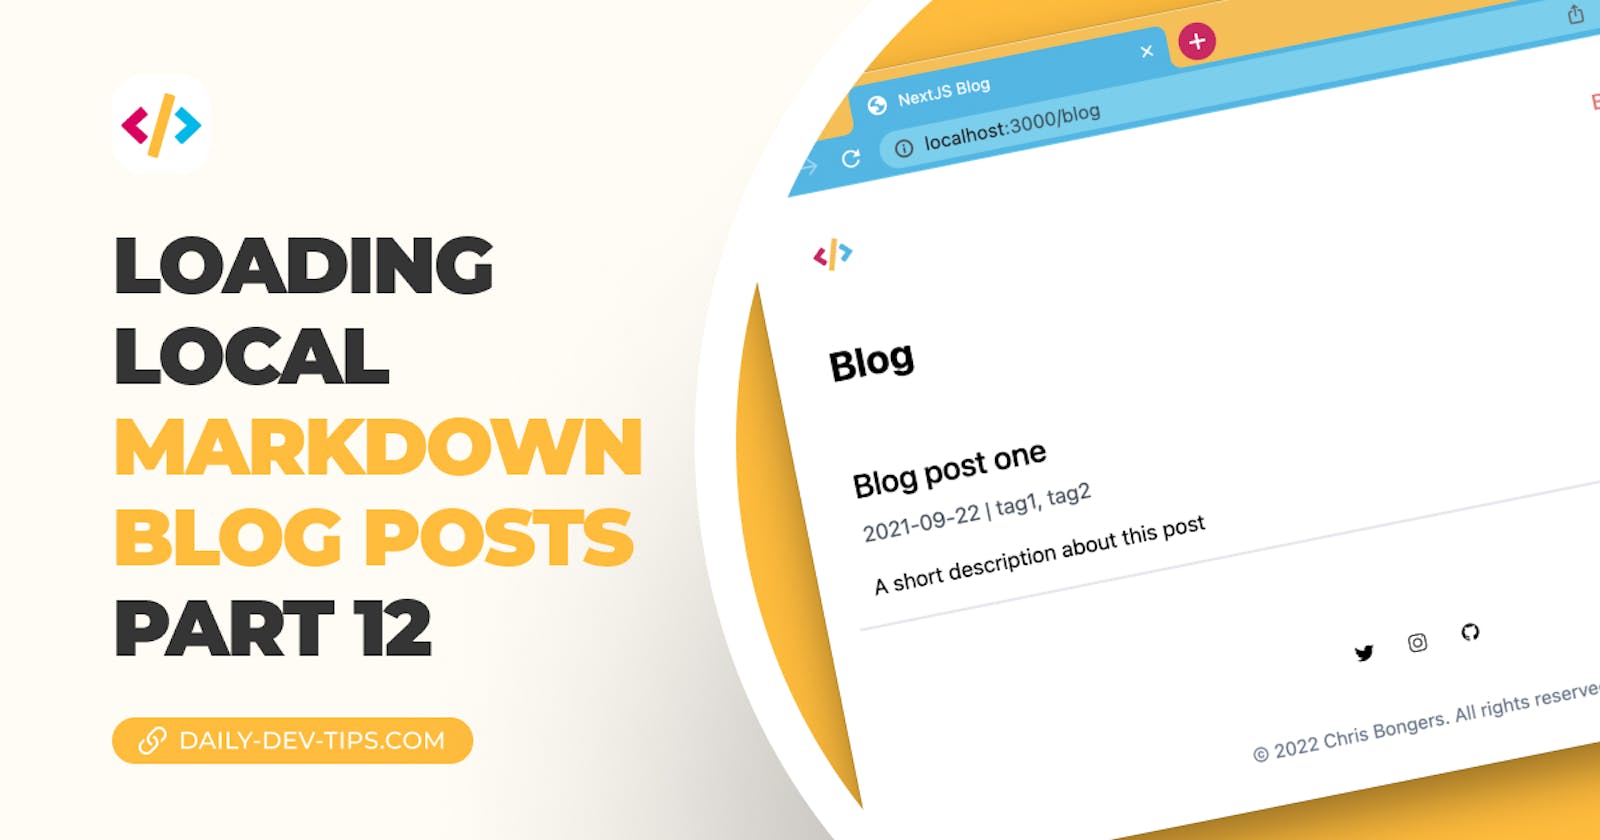 Loading local markdown blog posts - part 12